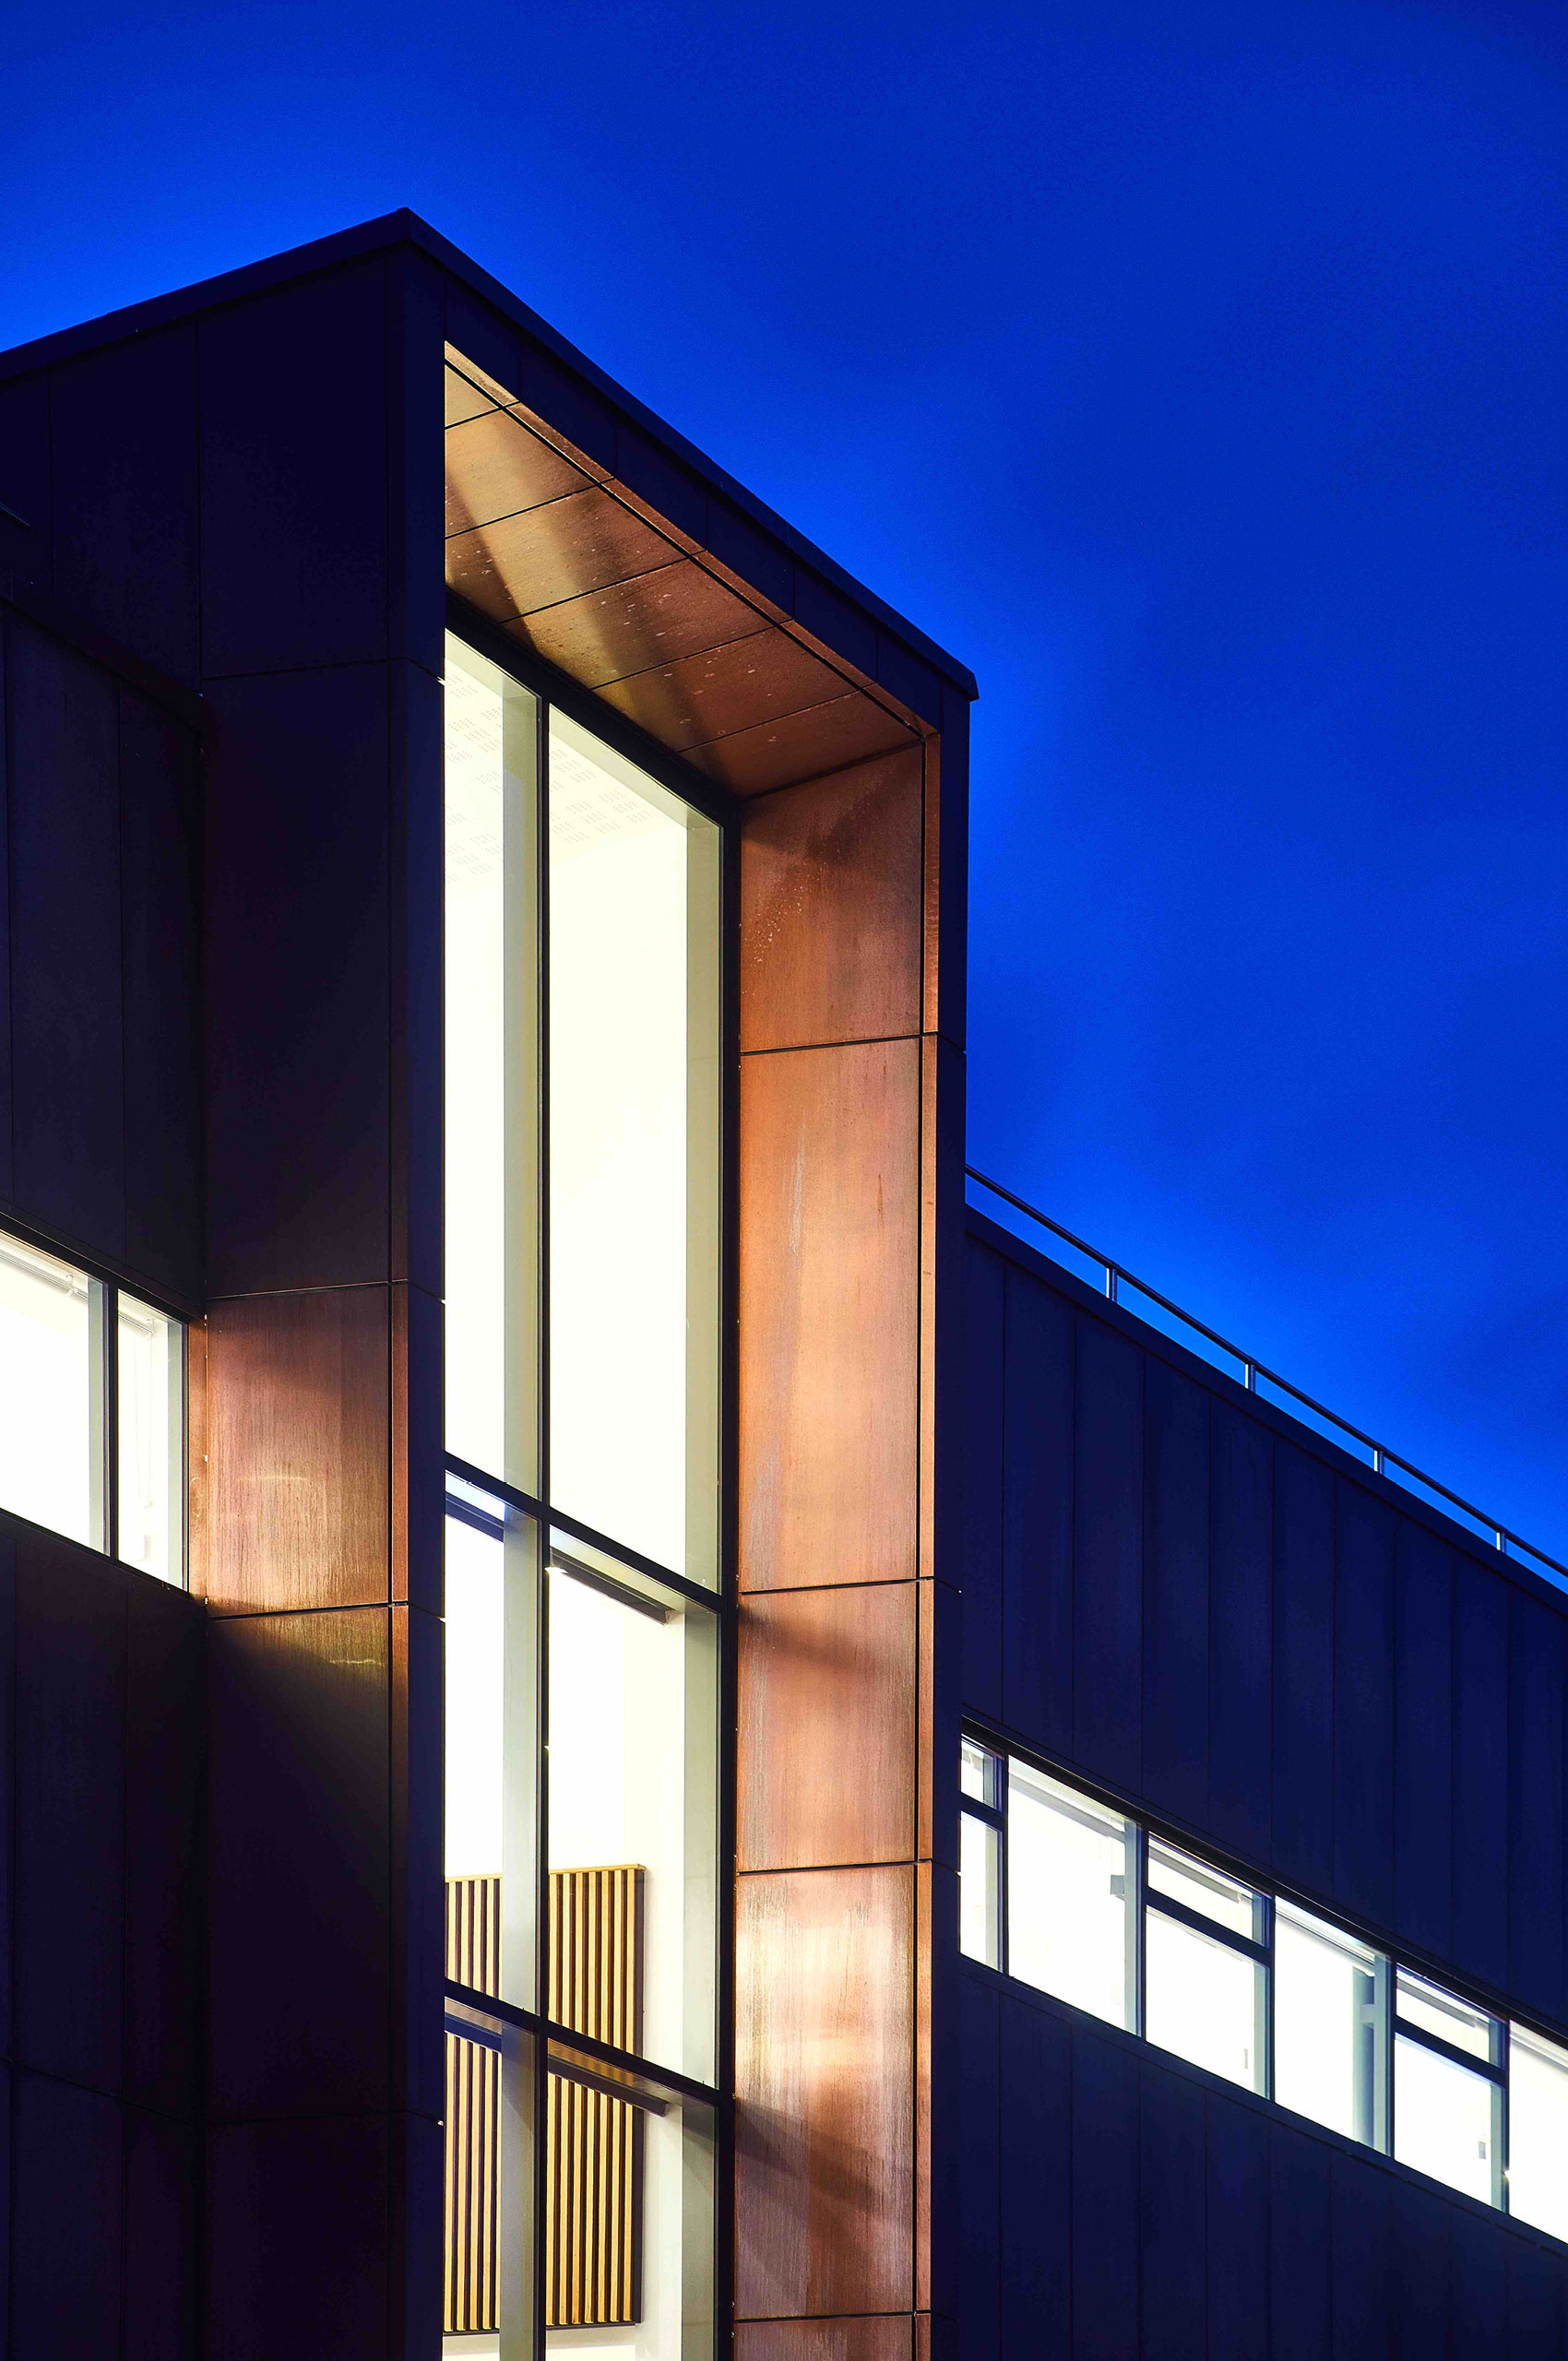 The Catalyst Building, Edge Hill University, Ormskirk, UK Designed by ABW Architects